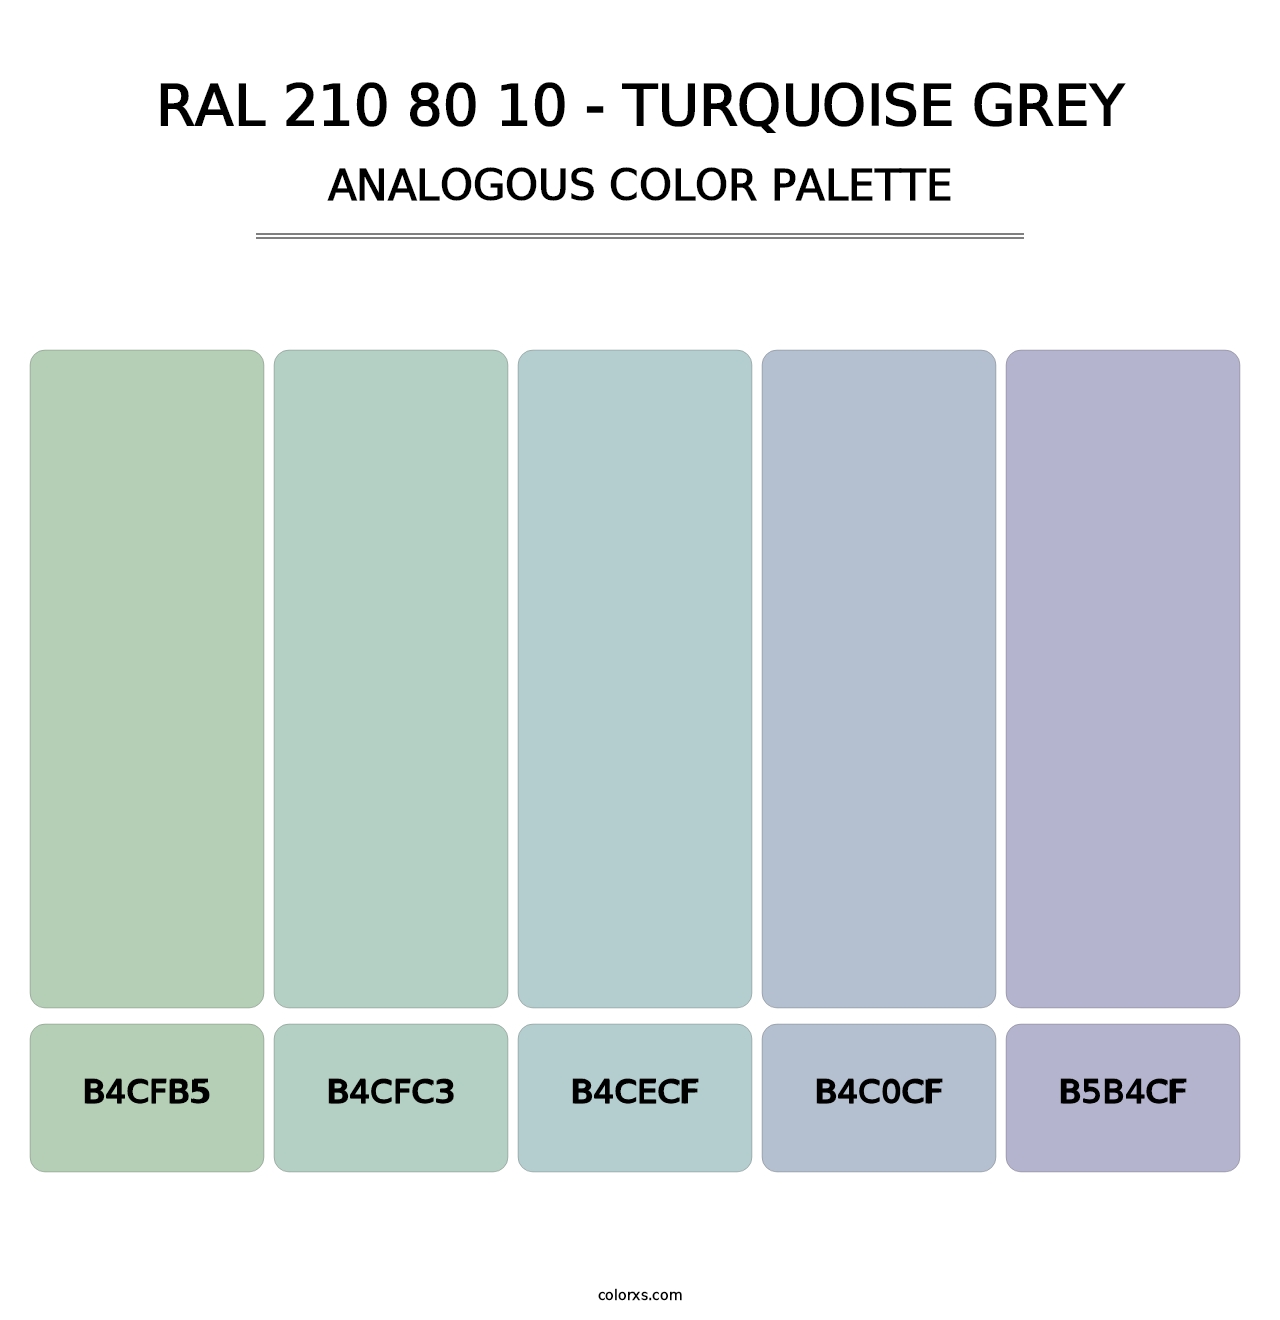 RAL 210 80 10 - Turquoise Grey - Analogous Color Palette